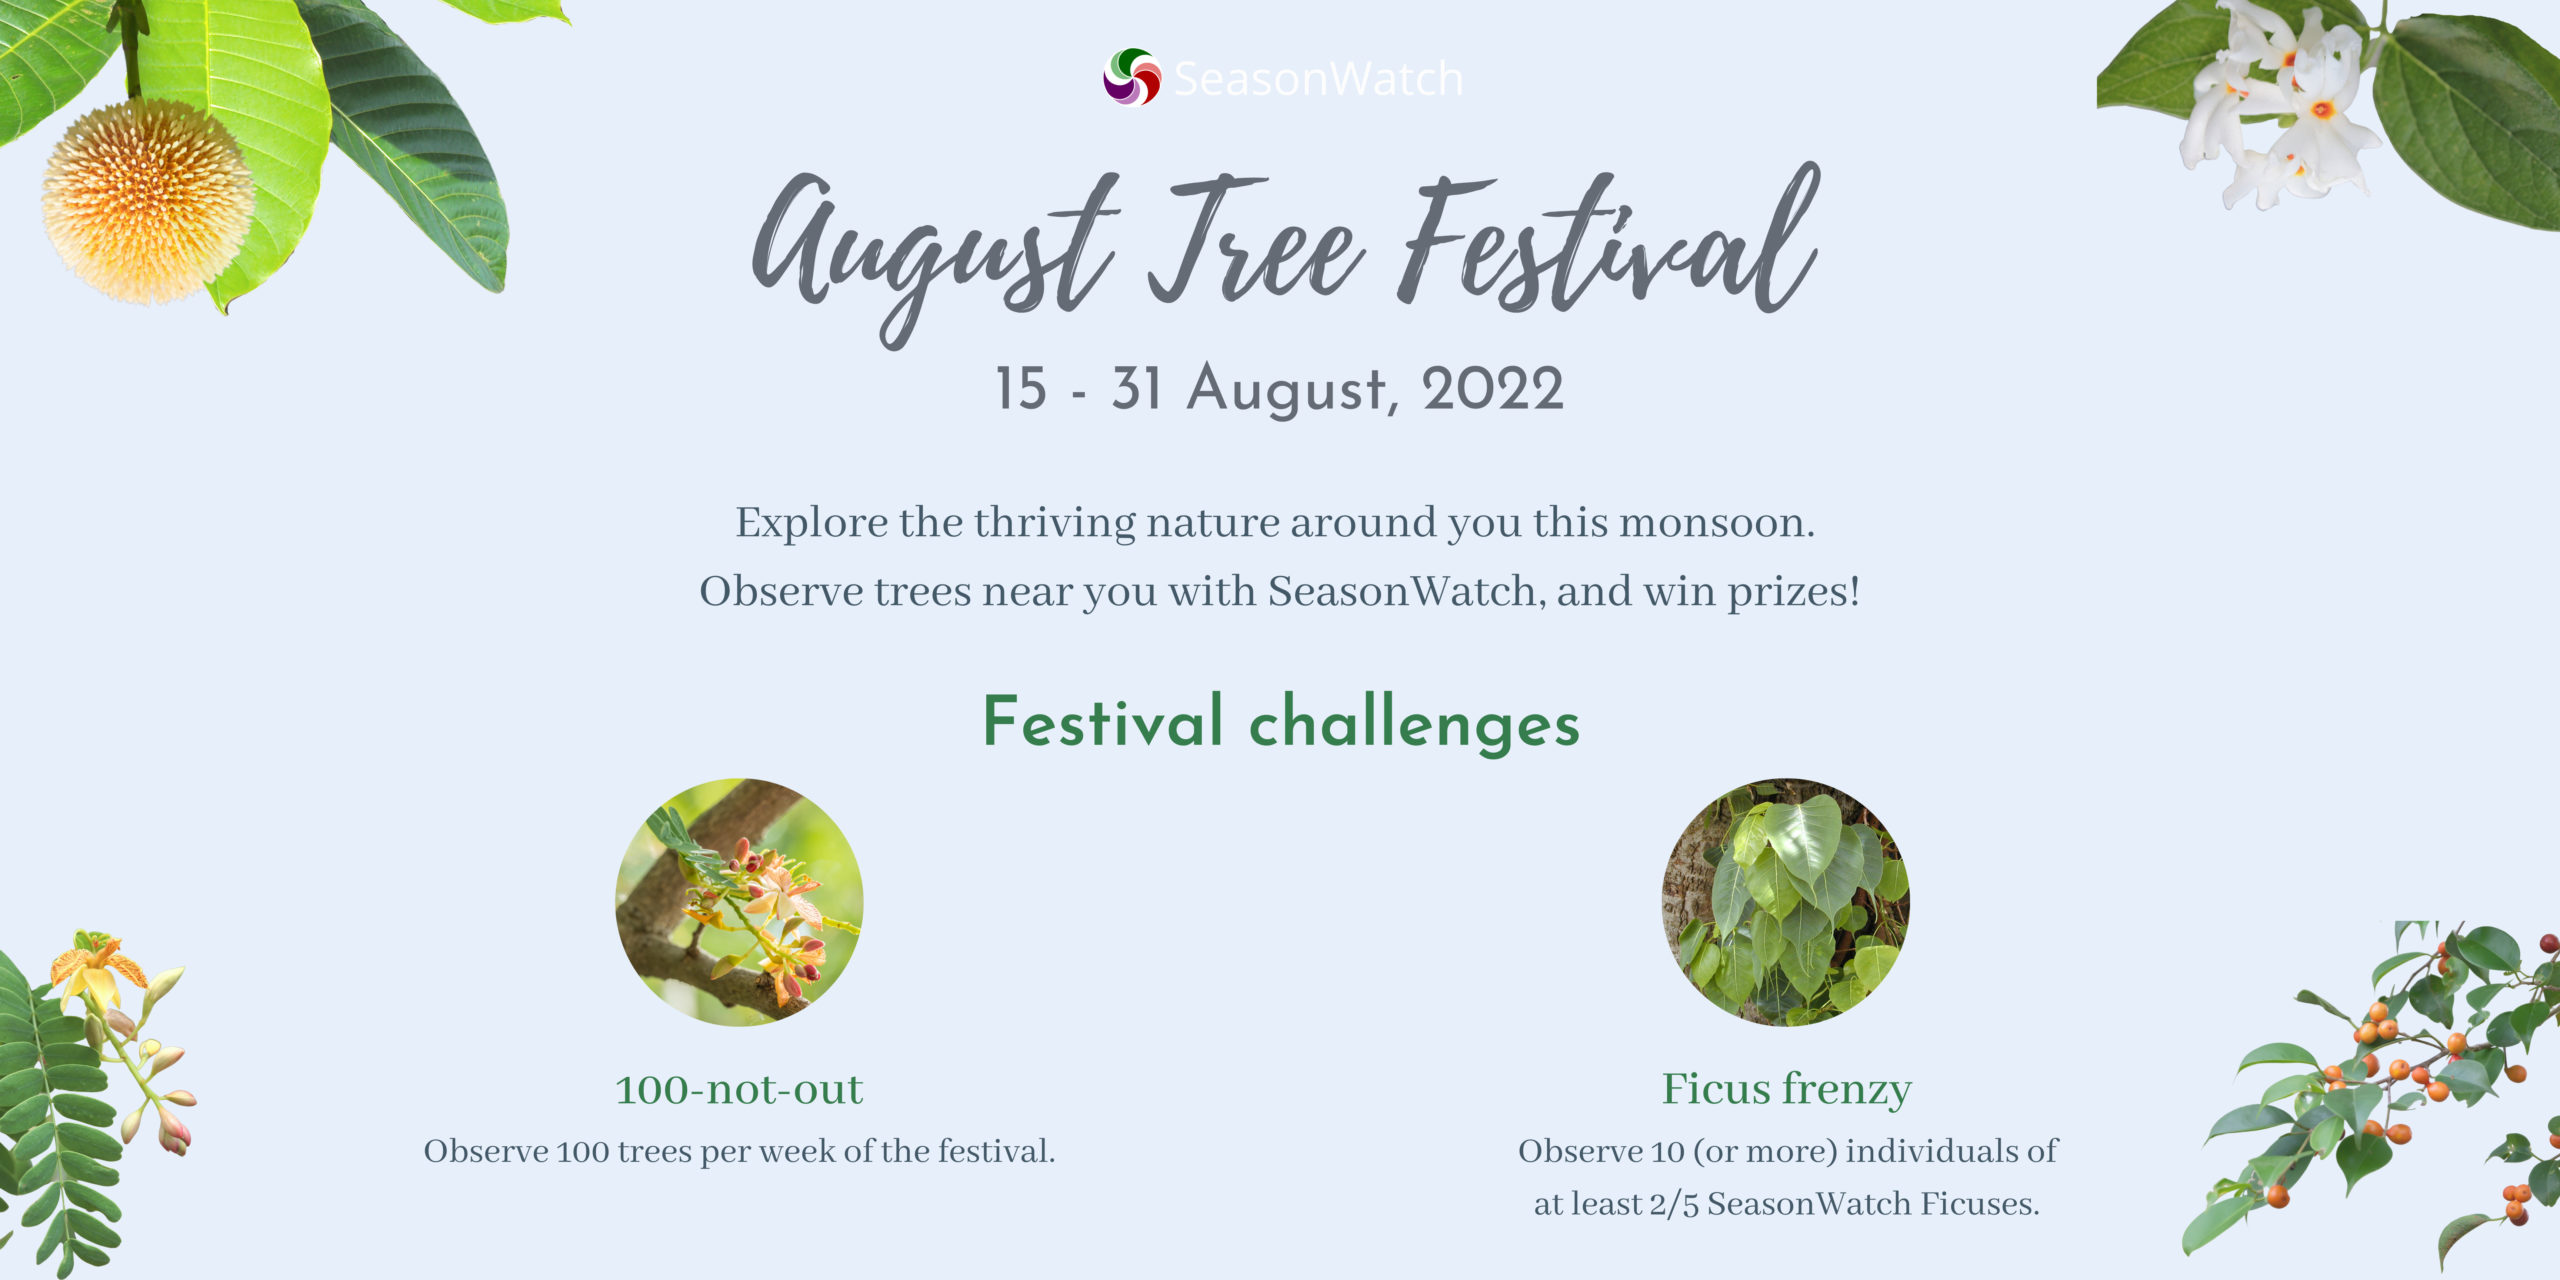 August Tree Festival 2022 – A report